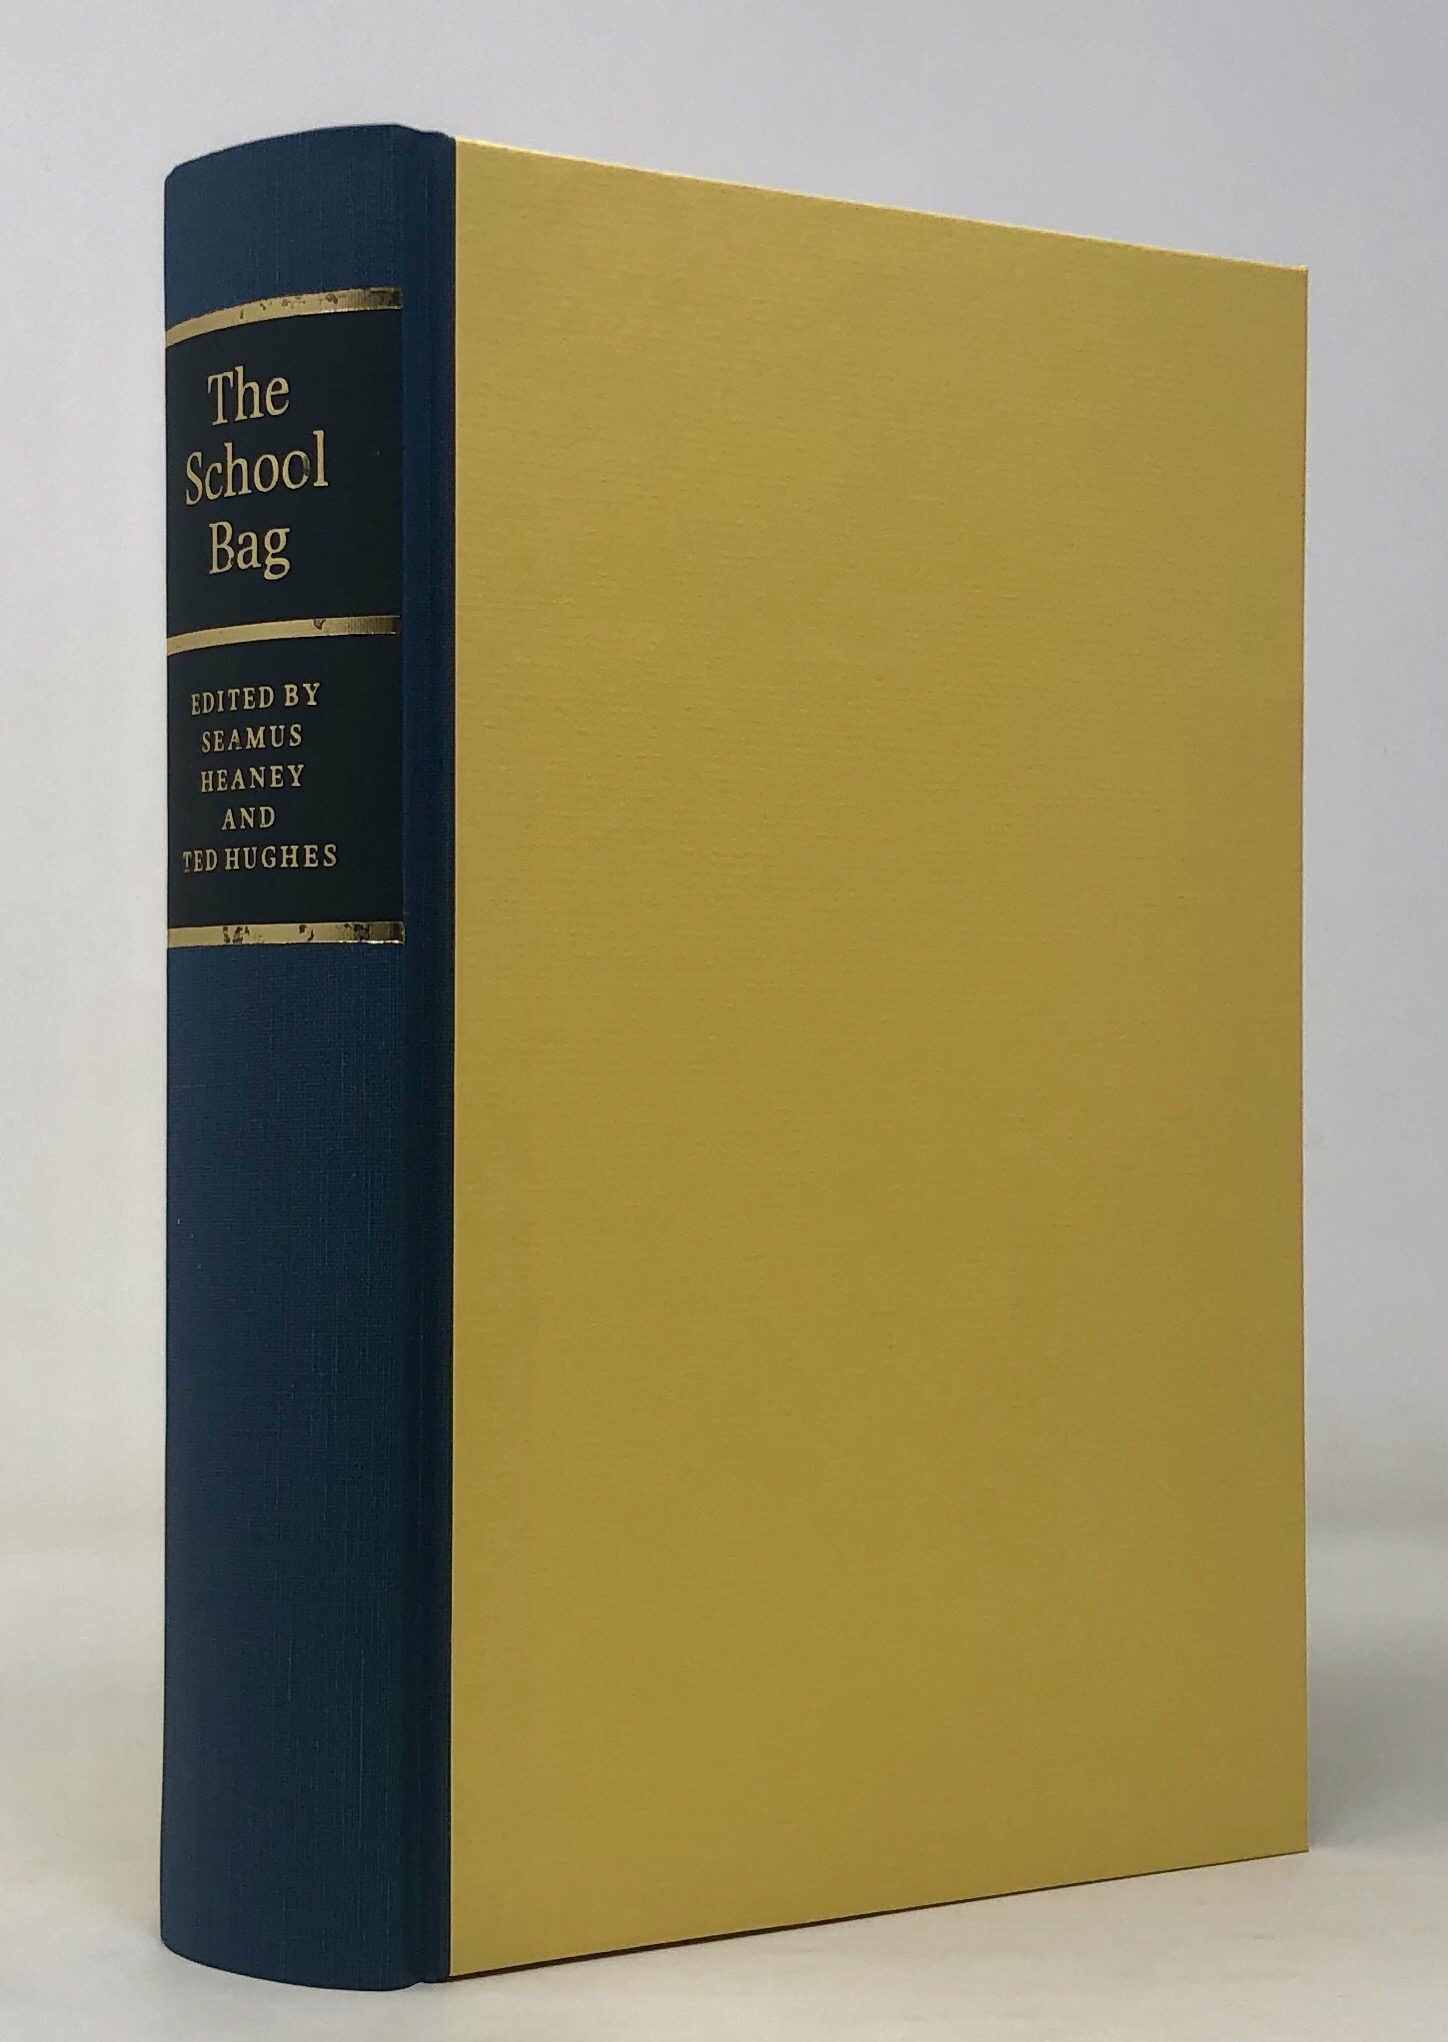 The School Bag Heaney Seamus Hughes Ted Editors First Edition